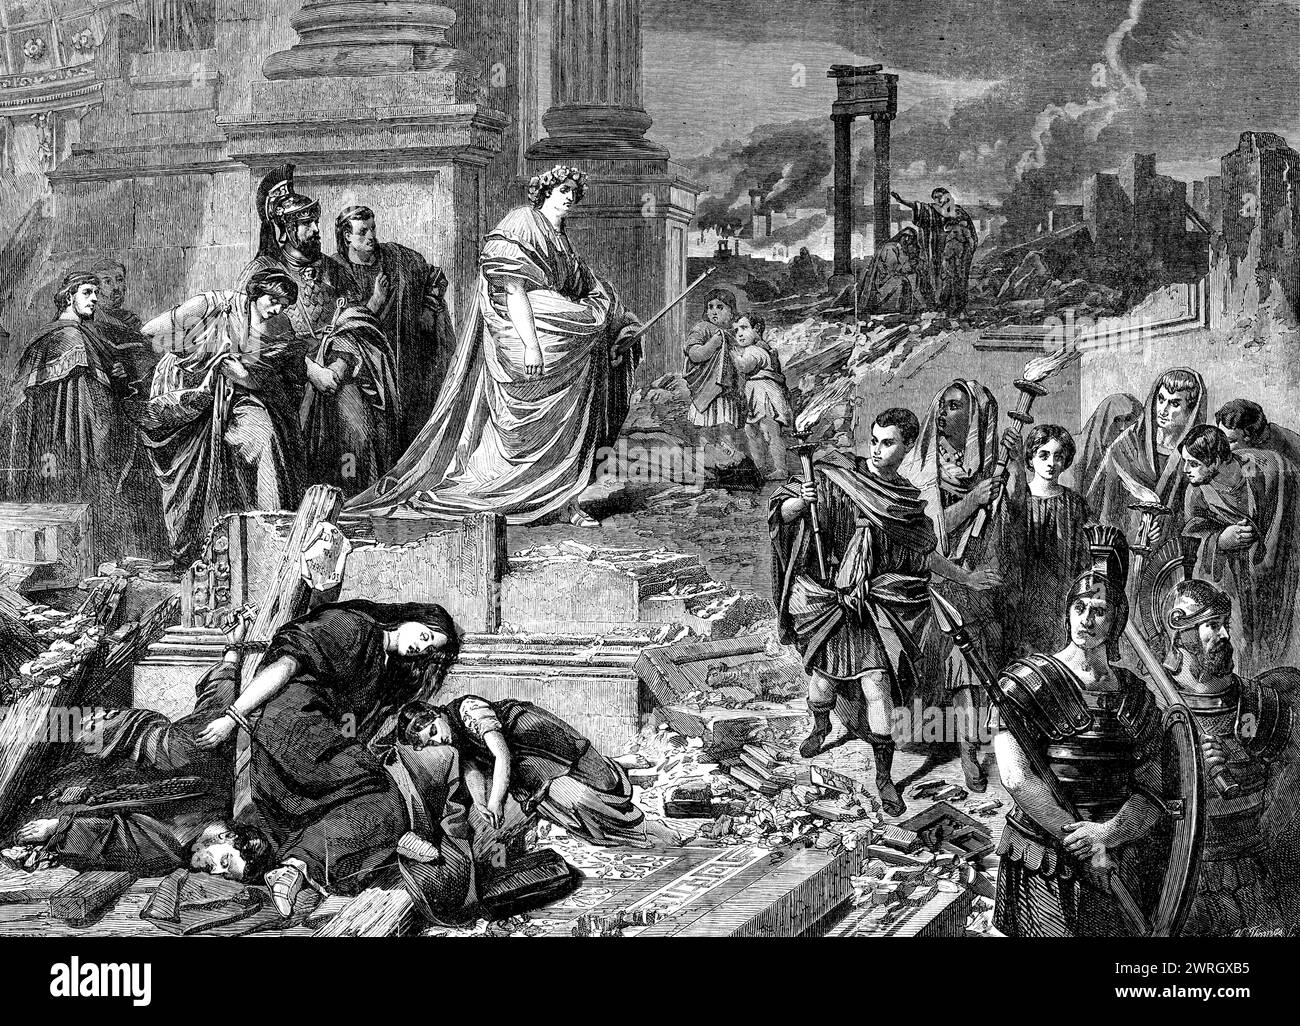 &quot;Nero after the Burning of Rome&quot;, by Carl Piloty, in the late International Exhibition, 1862. Engraving of a painting. '...the tyrant is represented stalking forth...to survey the desolation left by the flames, which still rage in the distance...he sweeps along without pity, horror, or remorse. Softly, like a prowling tiger, he treads over crumbling, tesselated pavement, and among fallen calcined capitals and architrave. There is a covert and furtive buoyancy in the bloated figure, which seems strangely belied by the rounded, unmanly, disproportionate arm hanging all so nerveless and Stock Photo